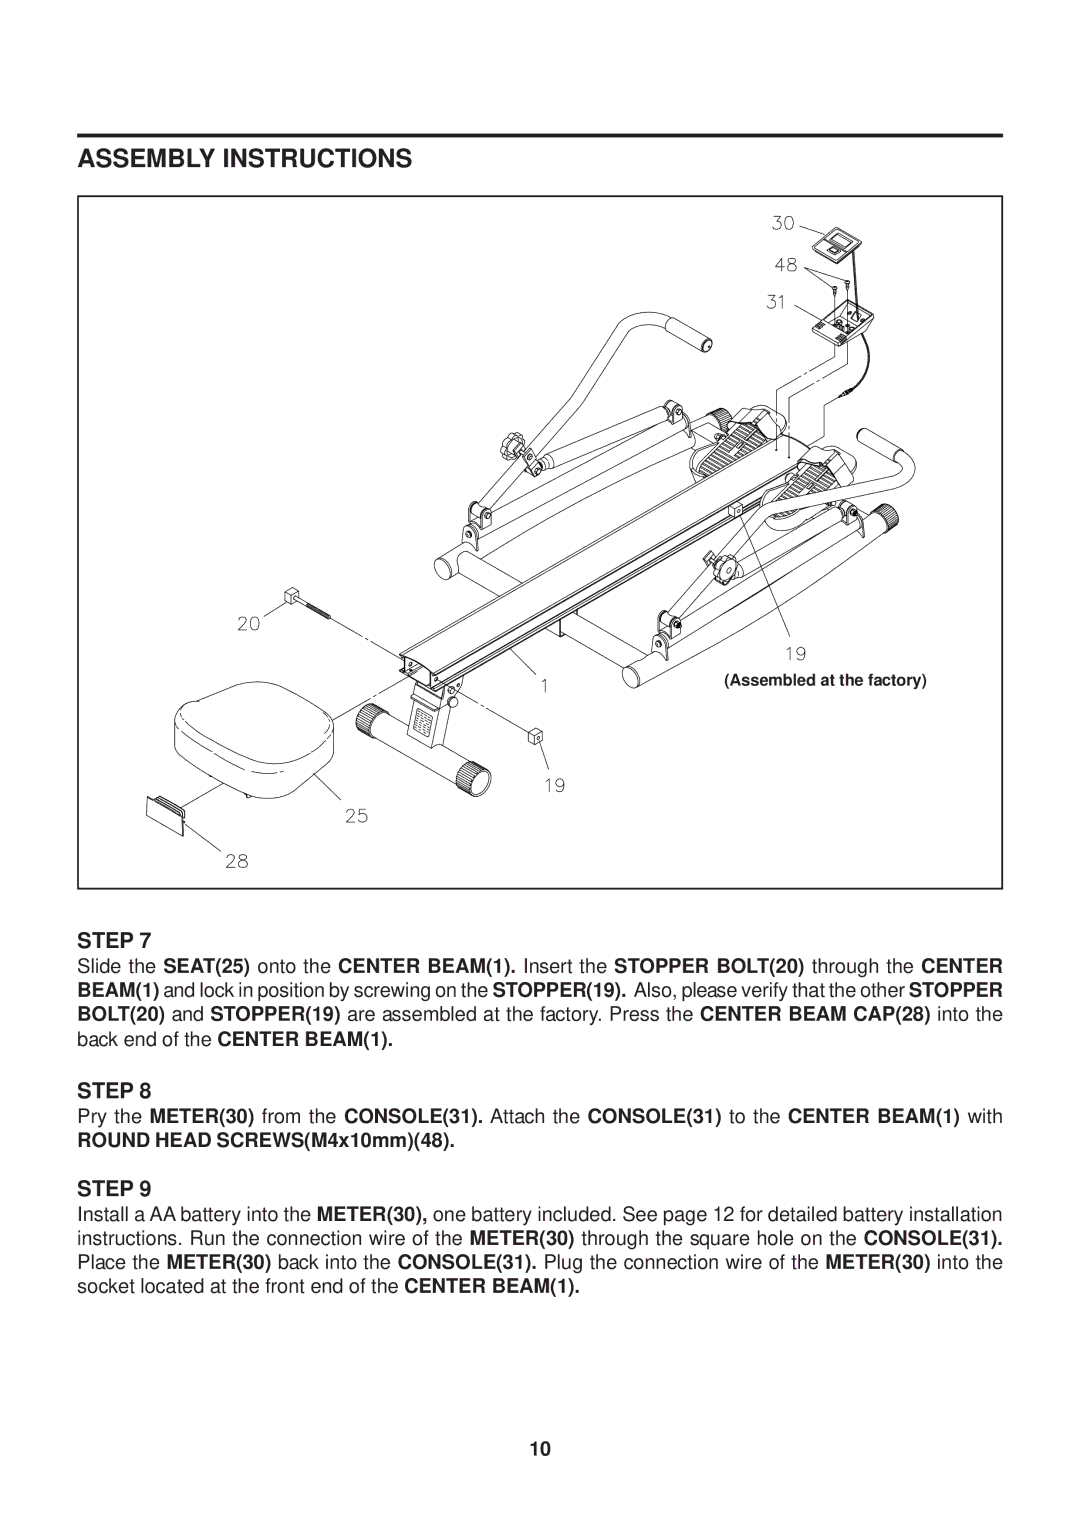 Stamina Products 1215 owner manual Assembled at the factory 